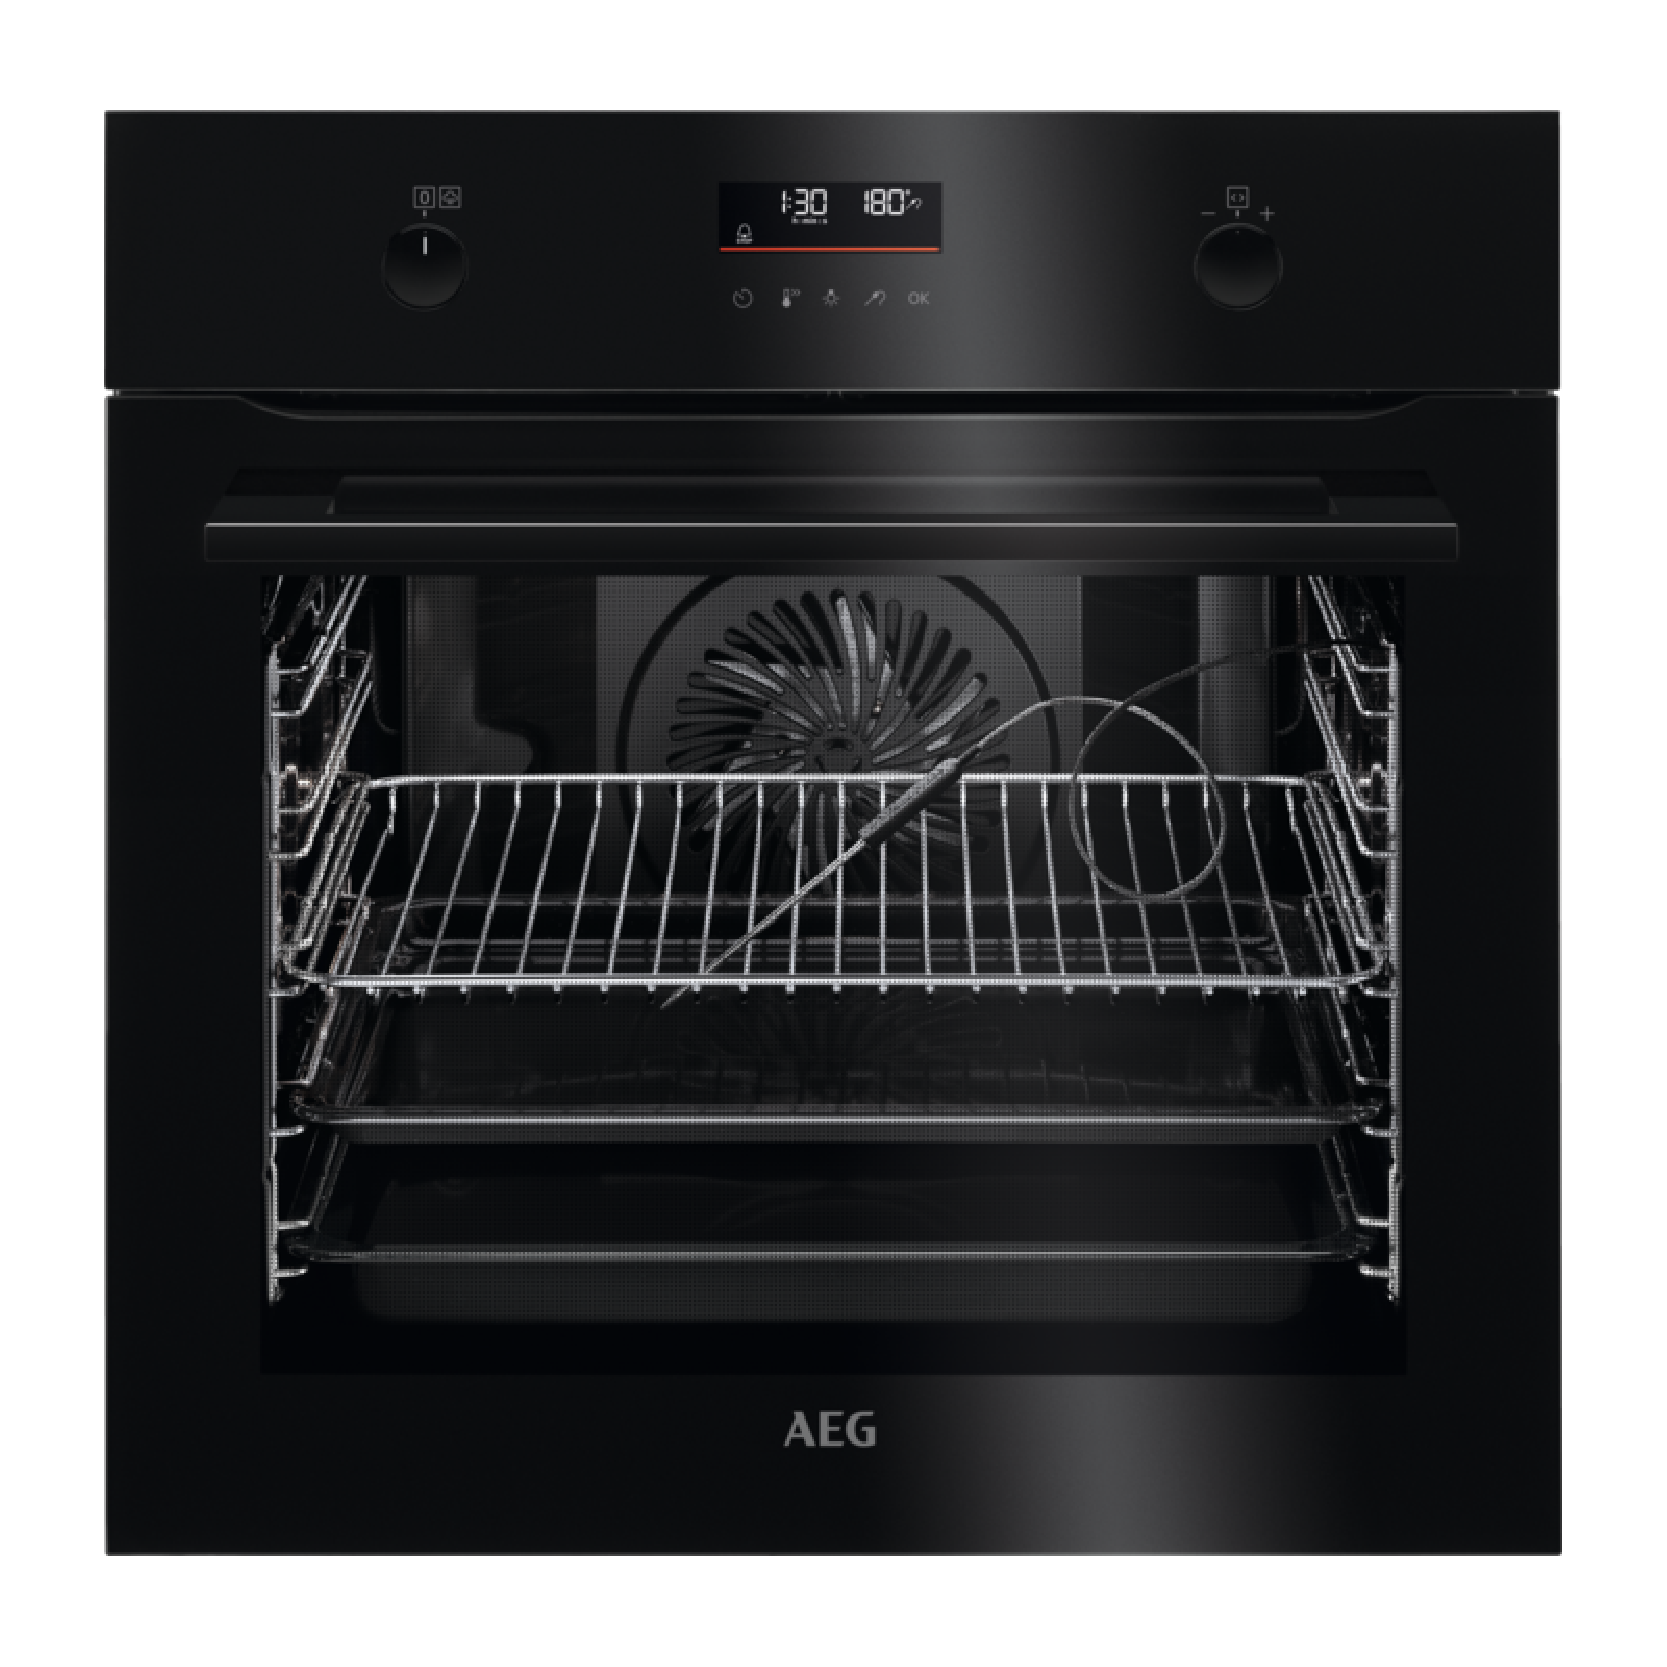 MULTIFUNCTION OVEN WITH STEAMBAKE AND ROTARY CONTROLS AEG | BPK556260B